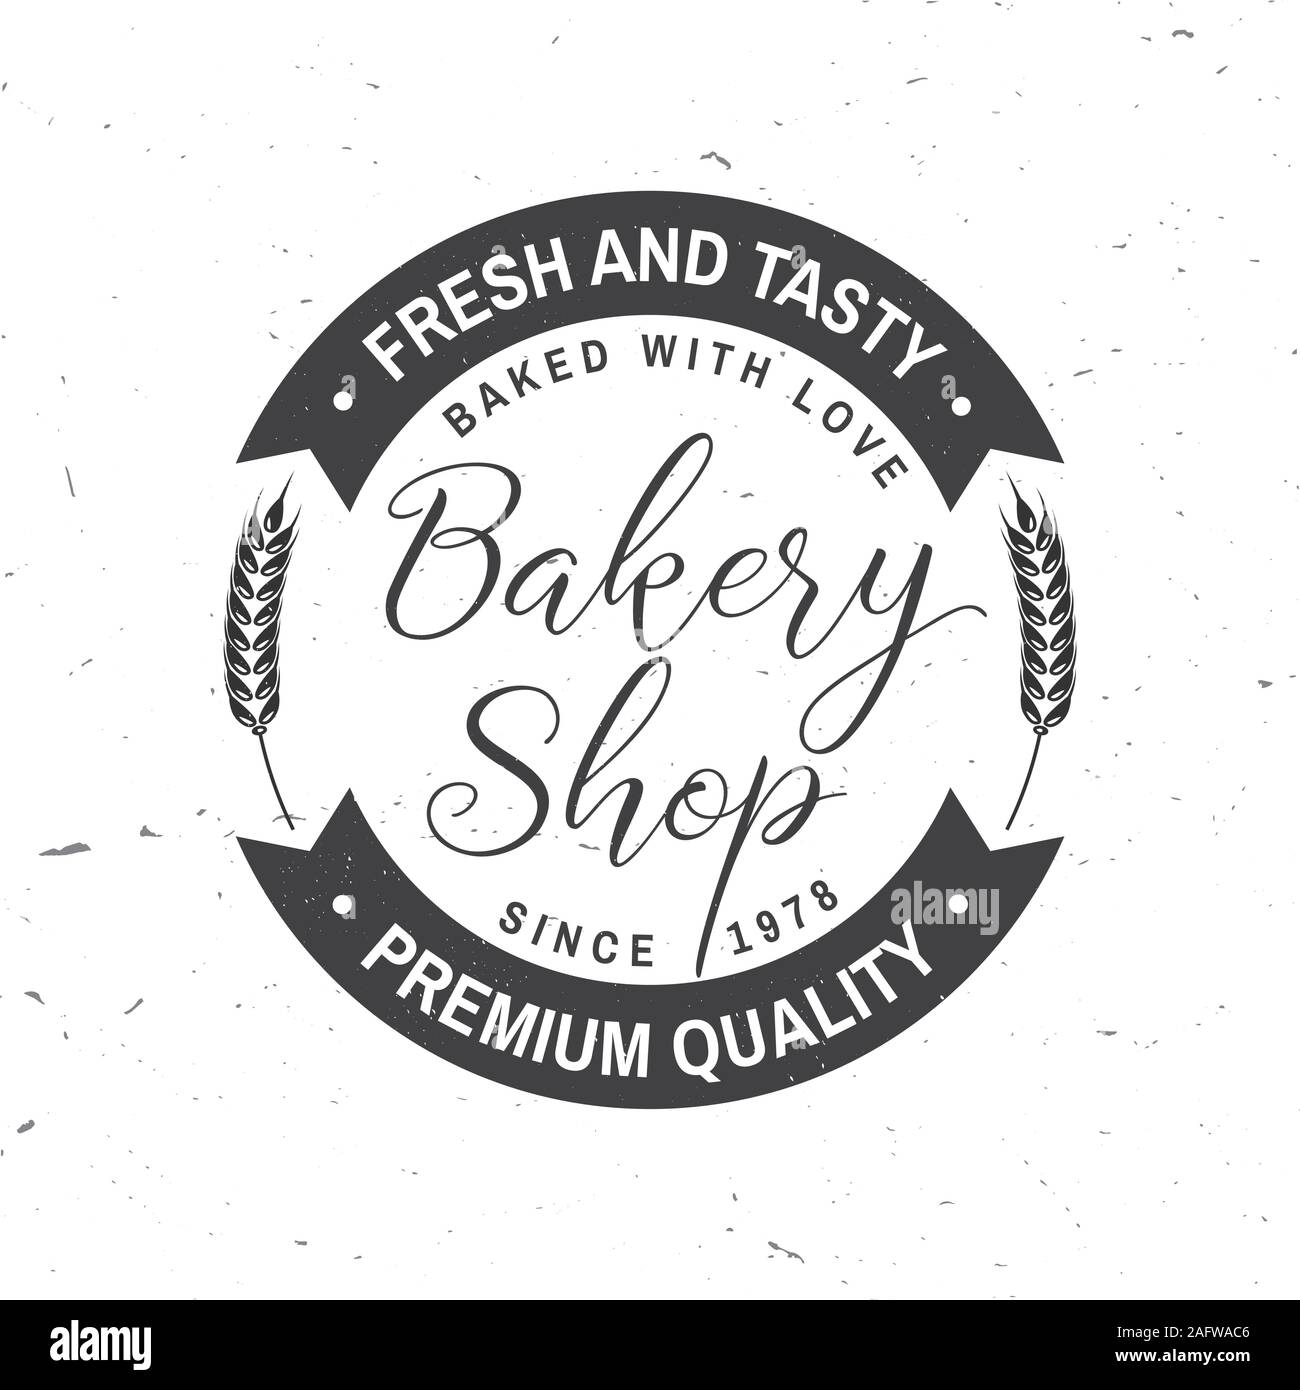 Bakery shop. Vector. Concept for badge, shirt, label, print, stamp or tee. Typography design with text, wheat ears silhouette. Template for restaurant identity objects, packaging and menu Stock Vector